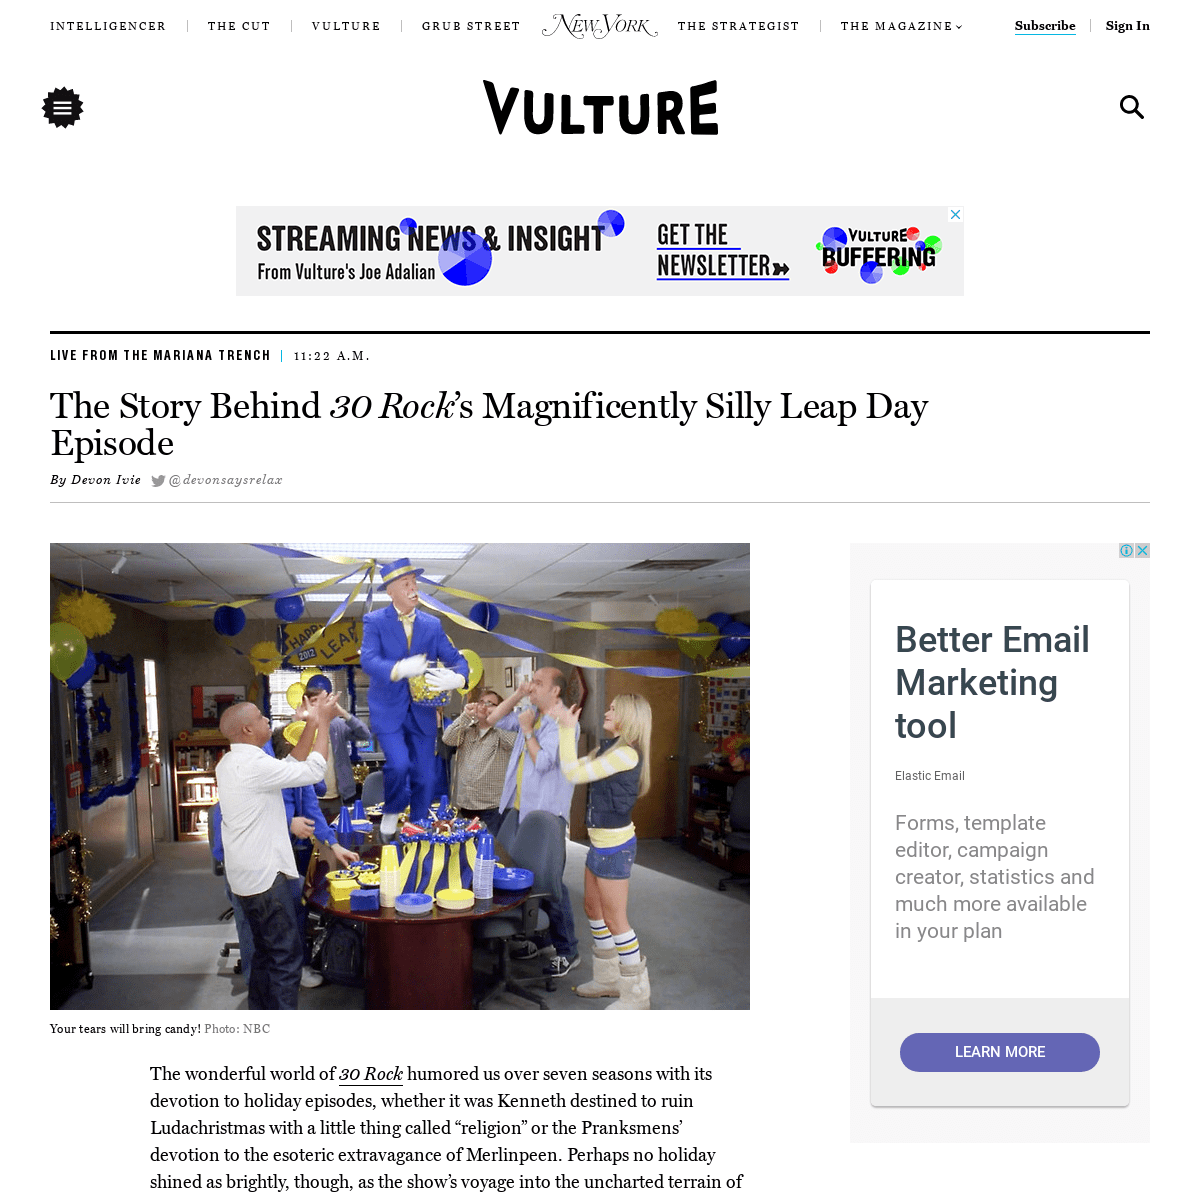 A complete backup of www.vulture.com/2020/02/30-rock-leap-day-william-episode.html